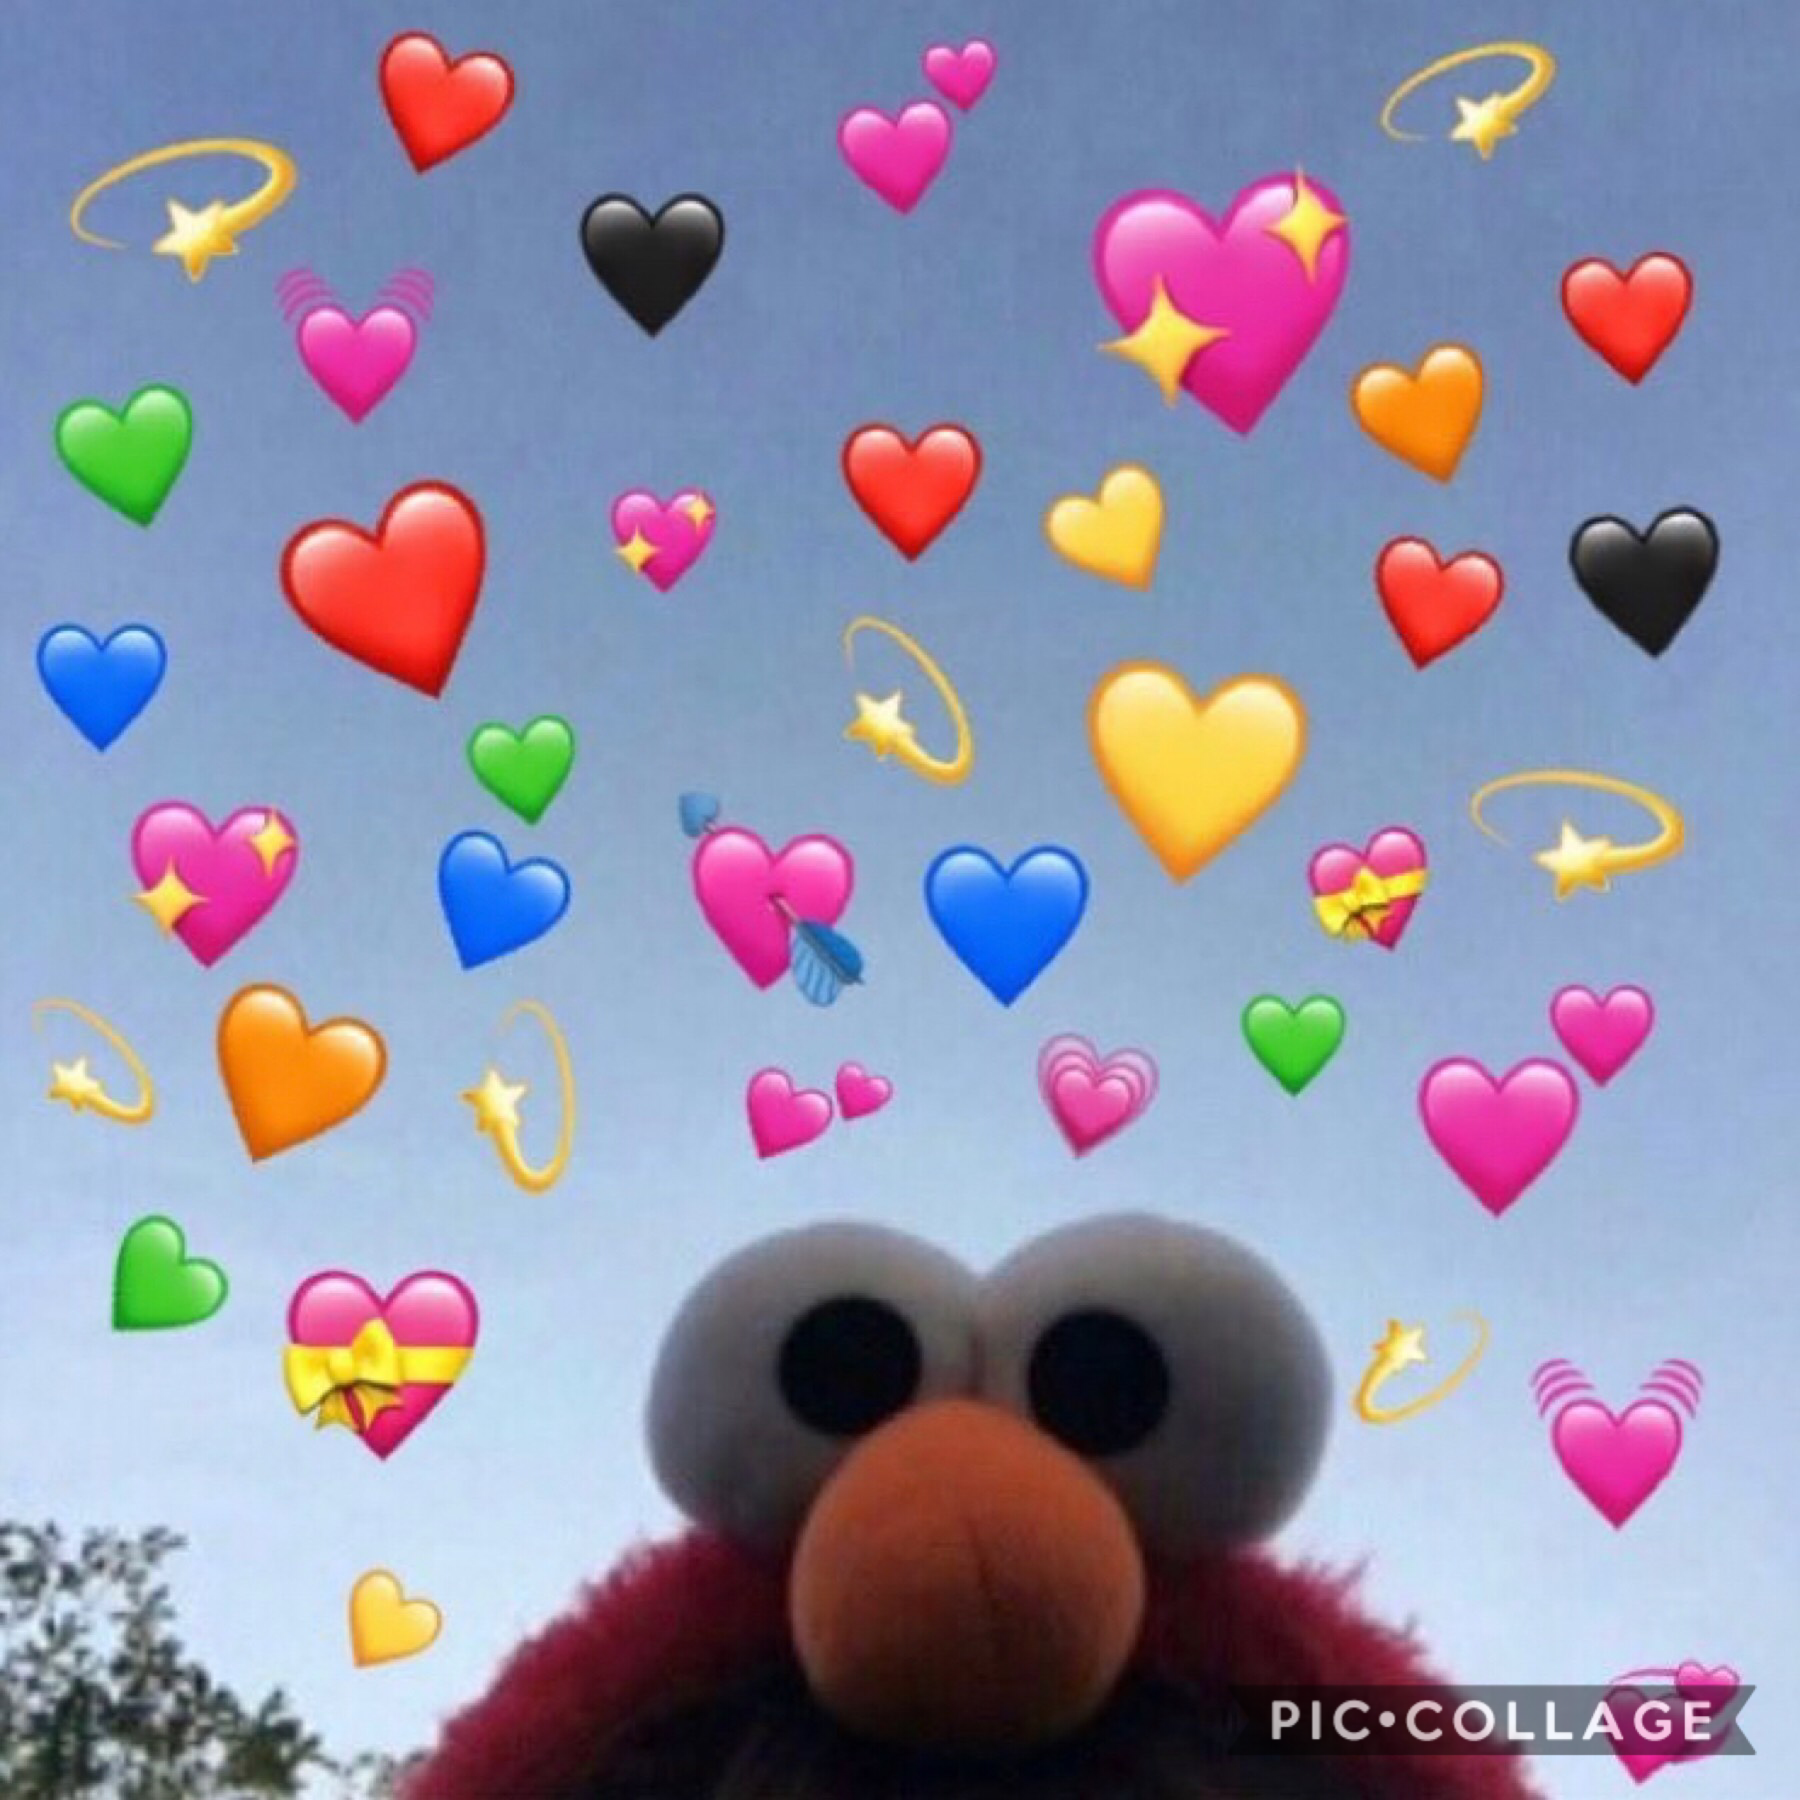 this is an official ayse appreciation post because she deserves the world uwu 💗💓💖💘💞😩😩